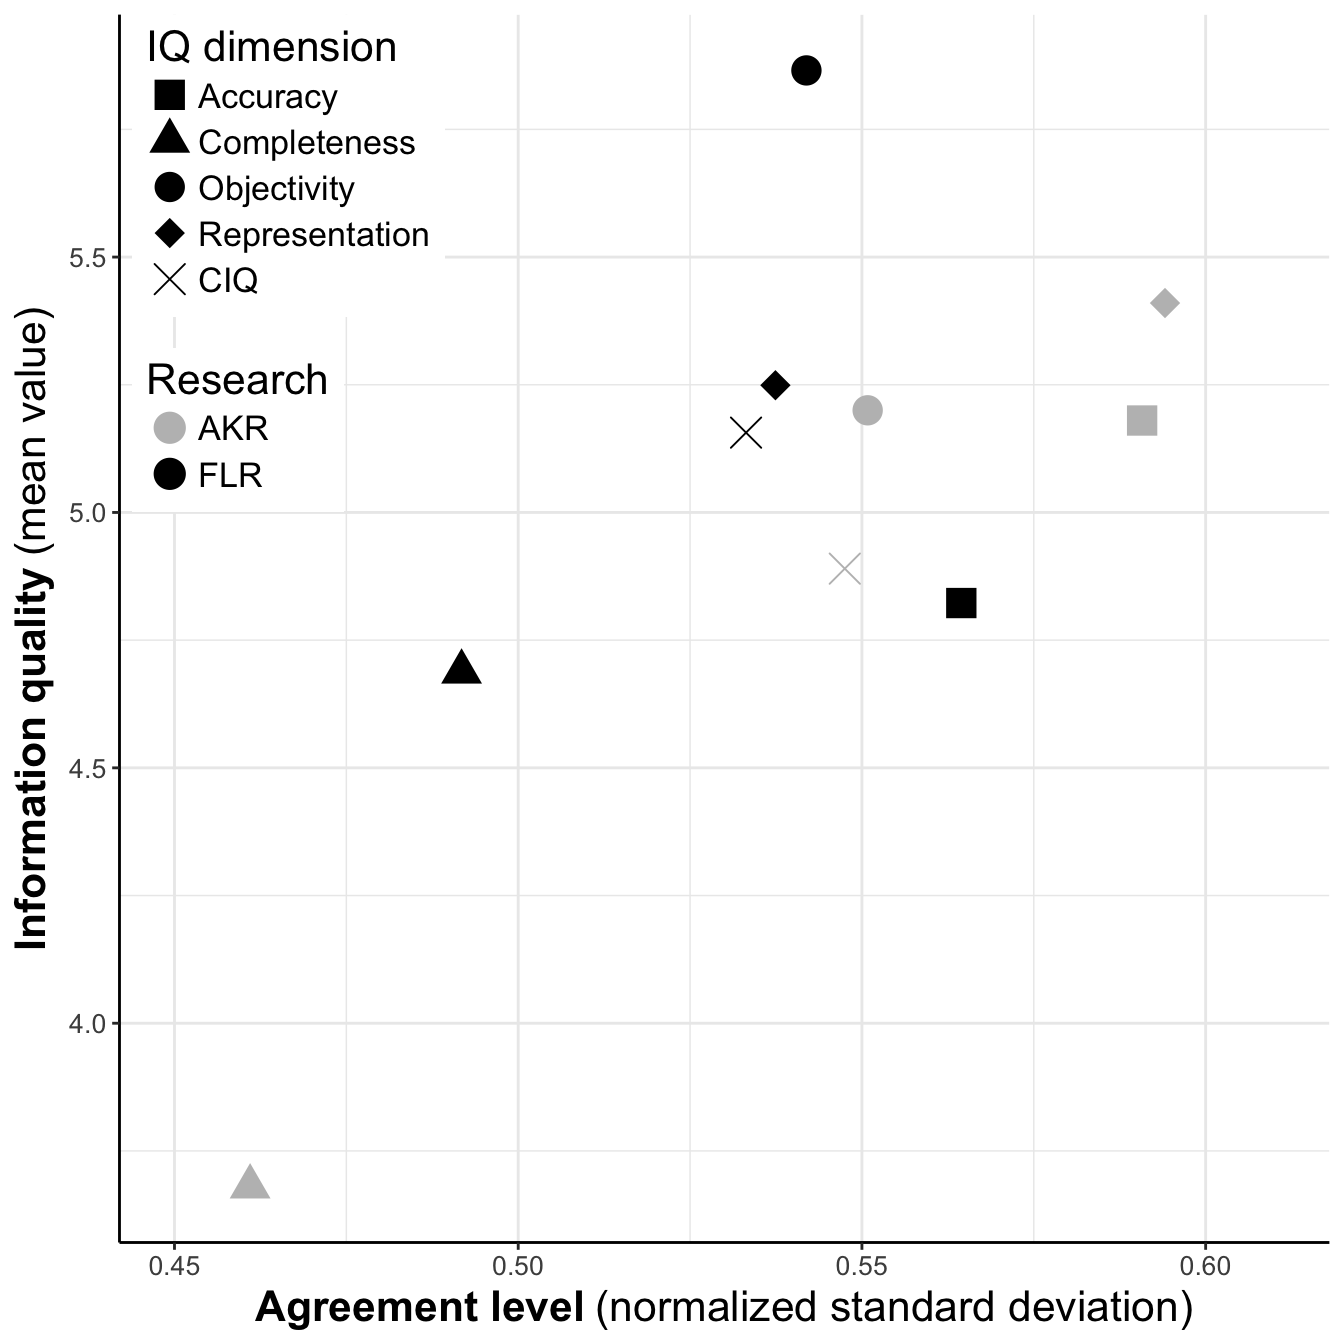 Impact of individual IQ dimensions on IQ and agreement, compared to AKR